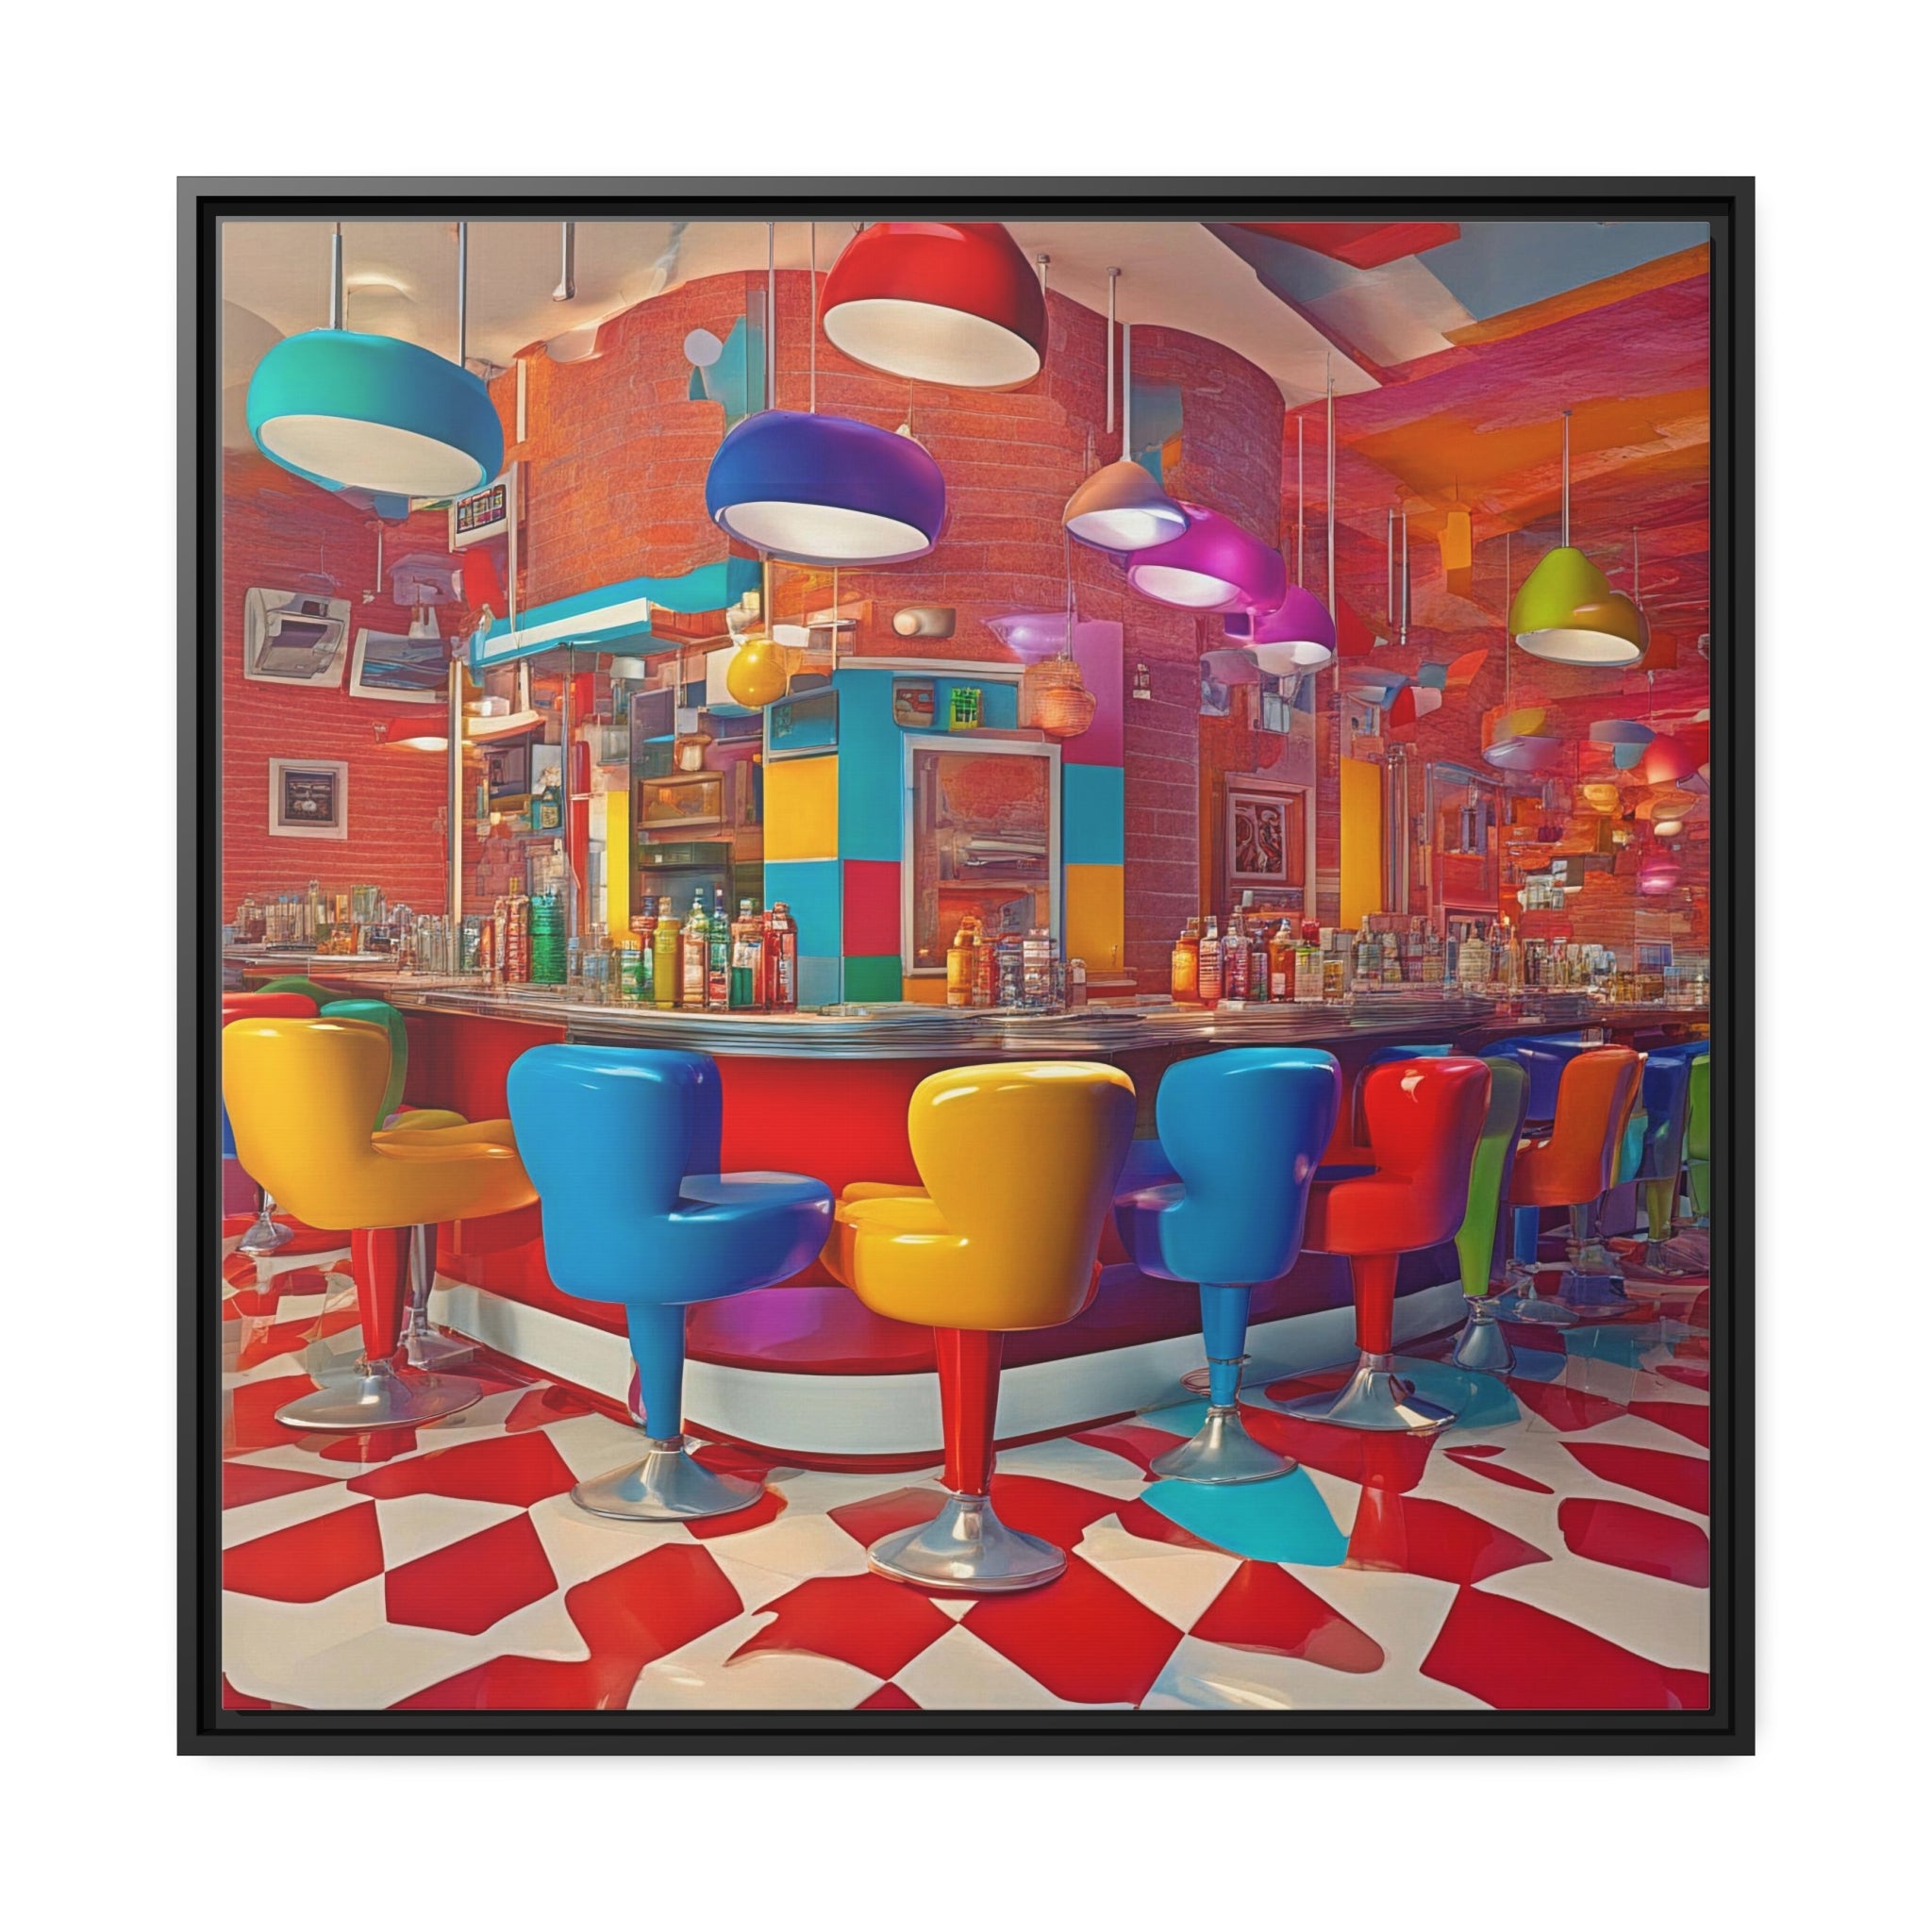 Wall Art DINER Canvas Print Painting Giclee 32x32 + Frame Love Pop Art Beauty Fun Design House Home Office Decor Gift Ready to Hang